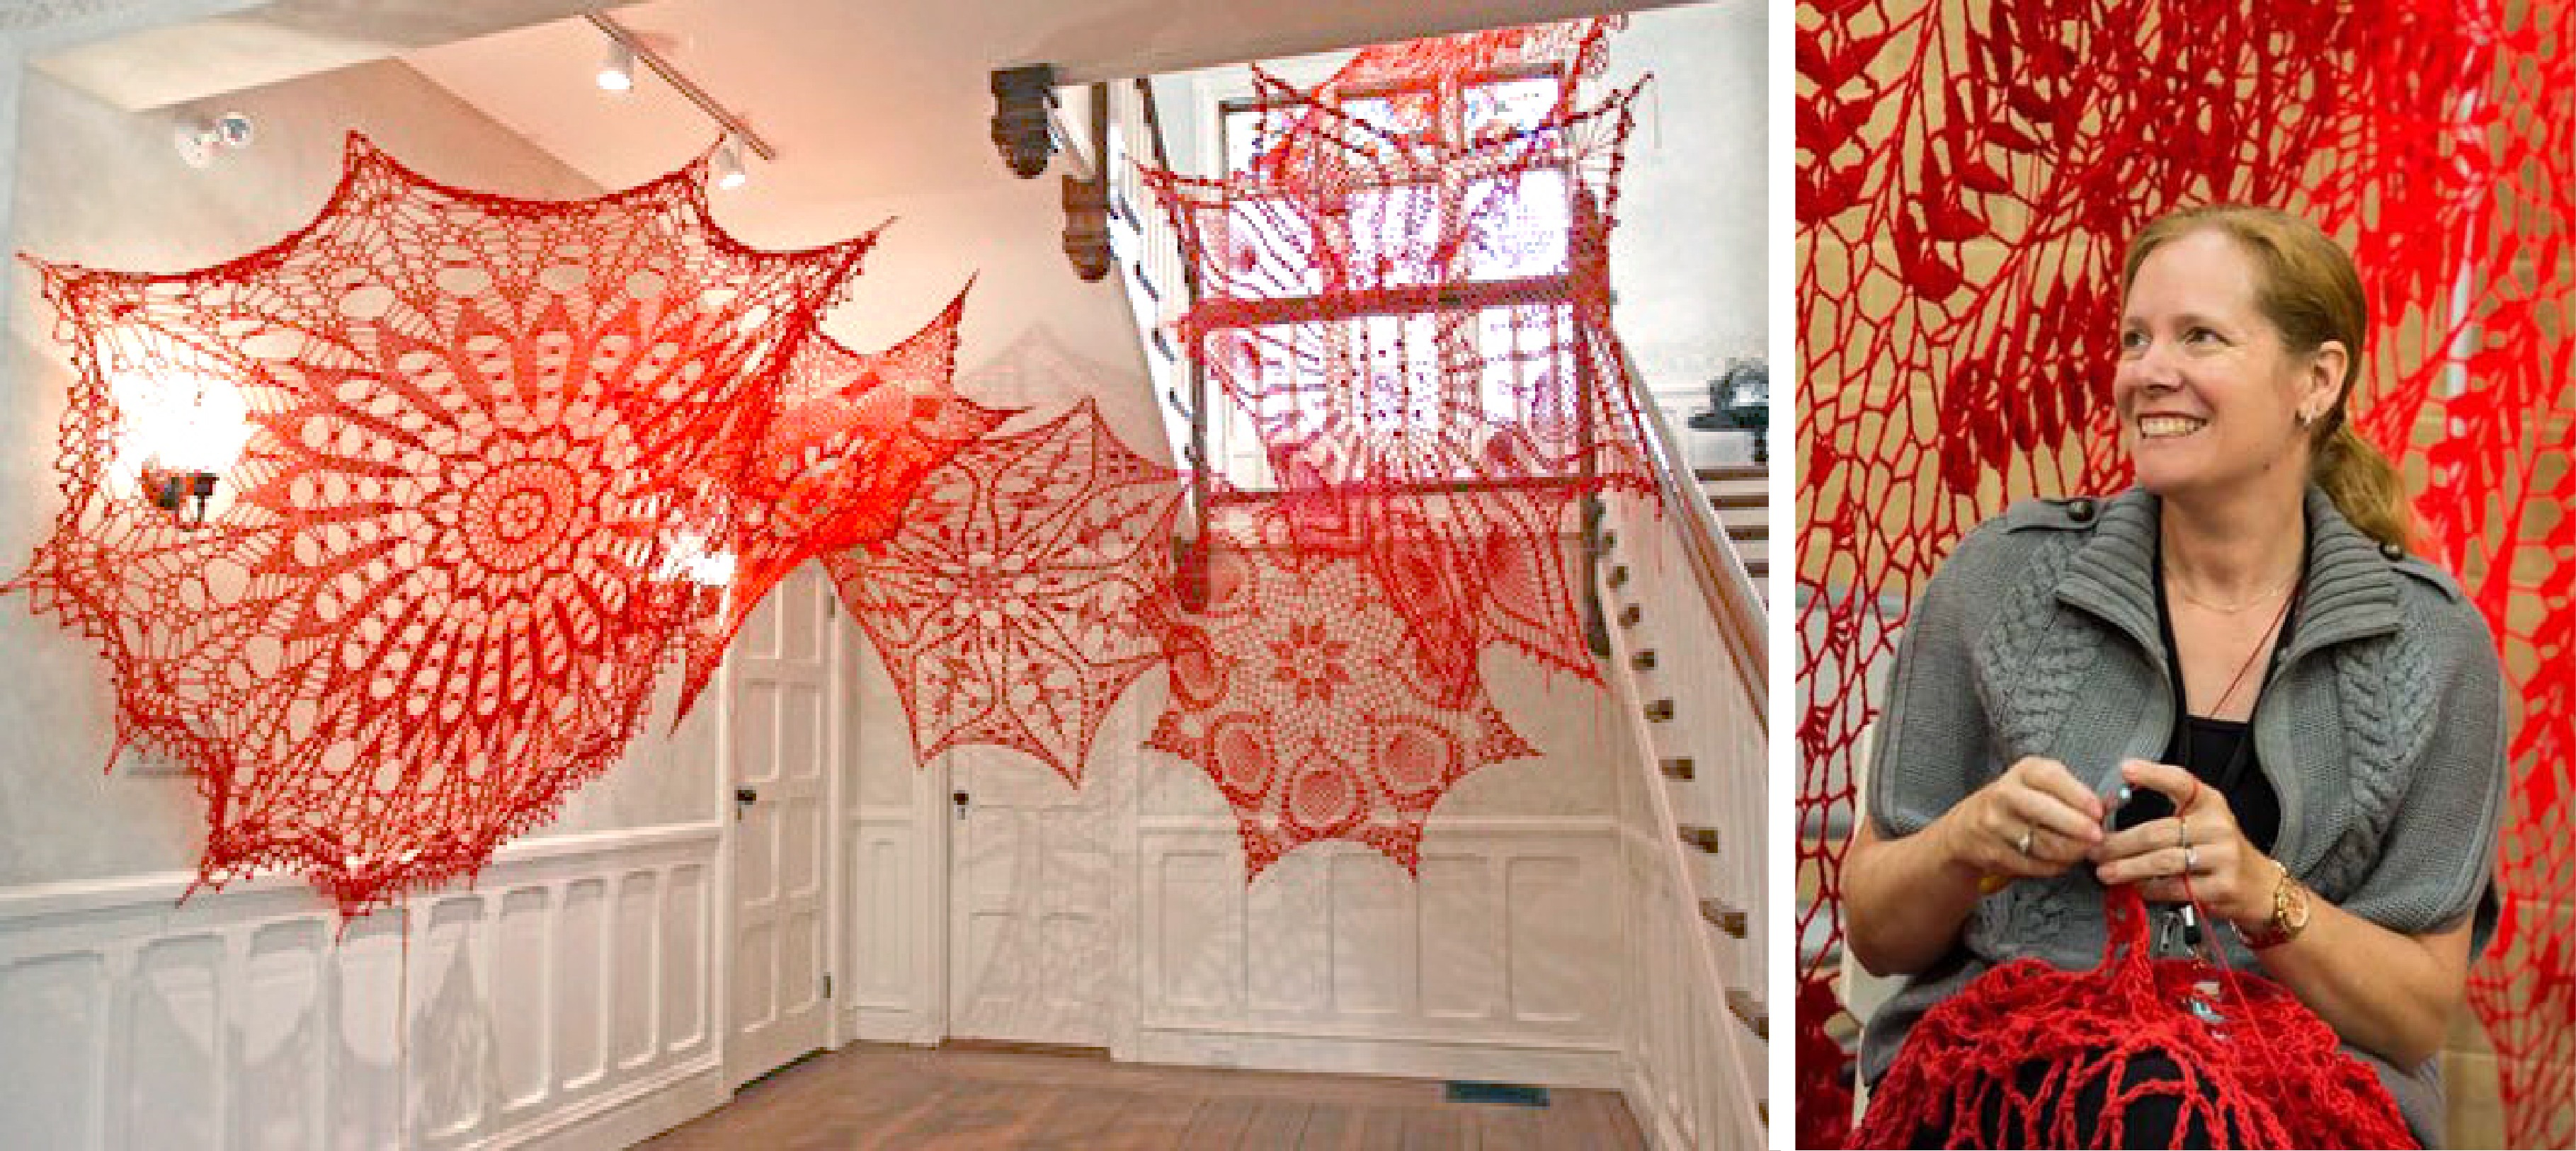 Two pictures are separated by a white line. In the first, large, red doilies drape the walls of a stairwell. In the second, Ashley V. Blalock crochets a red doily.